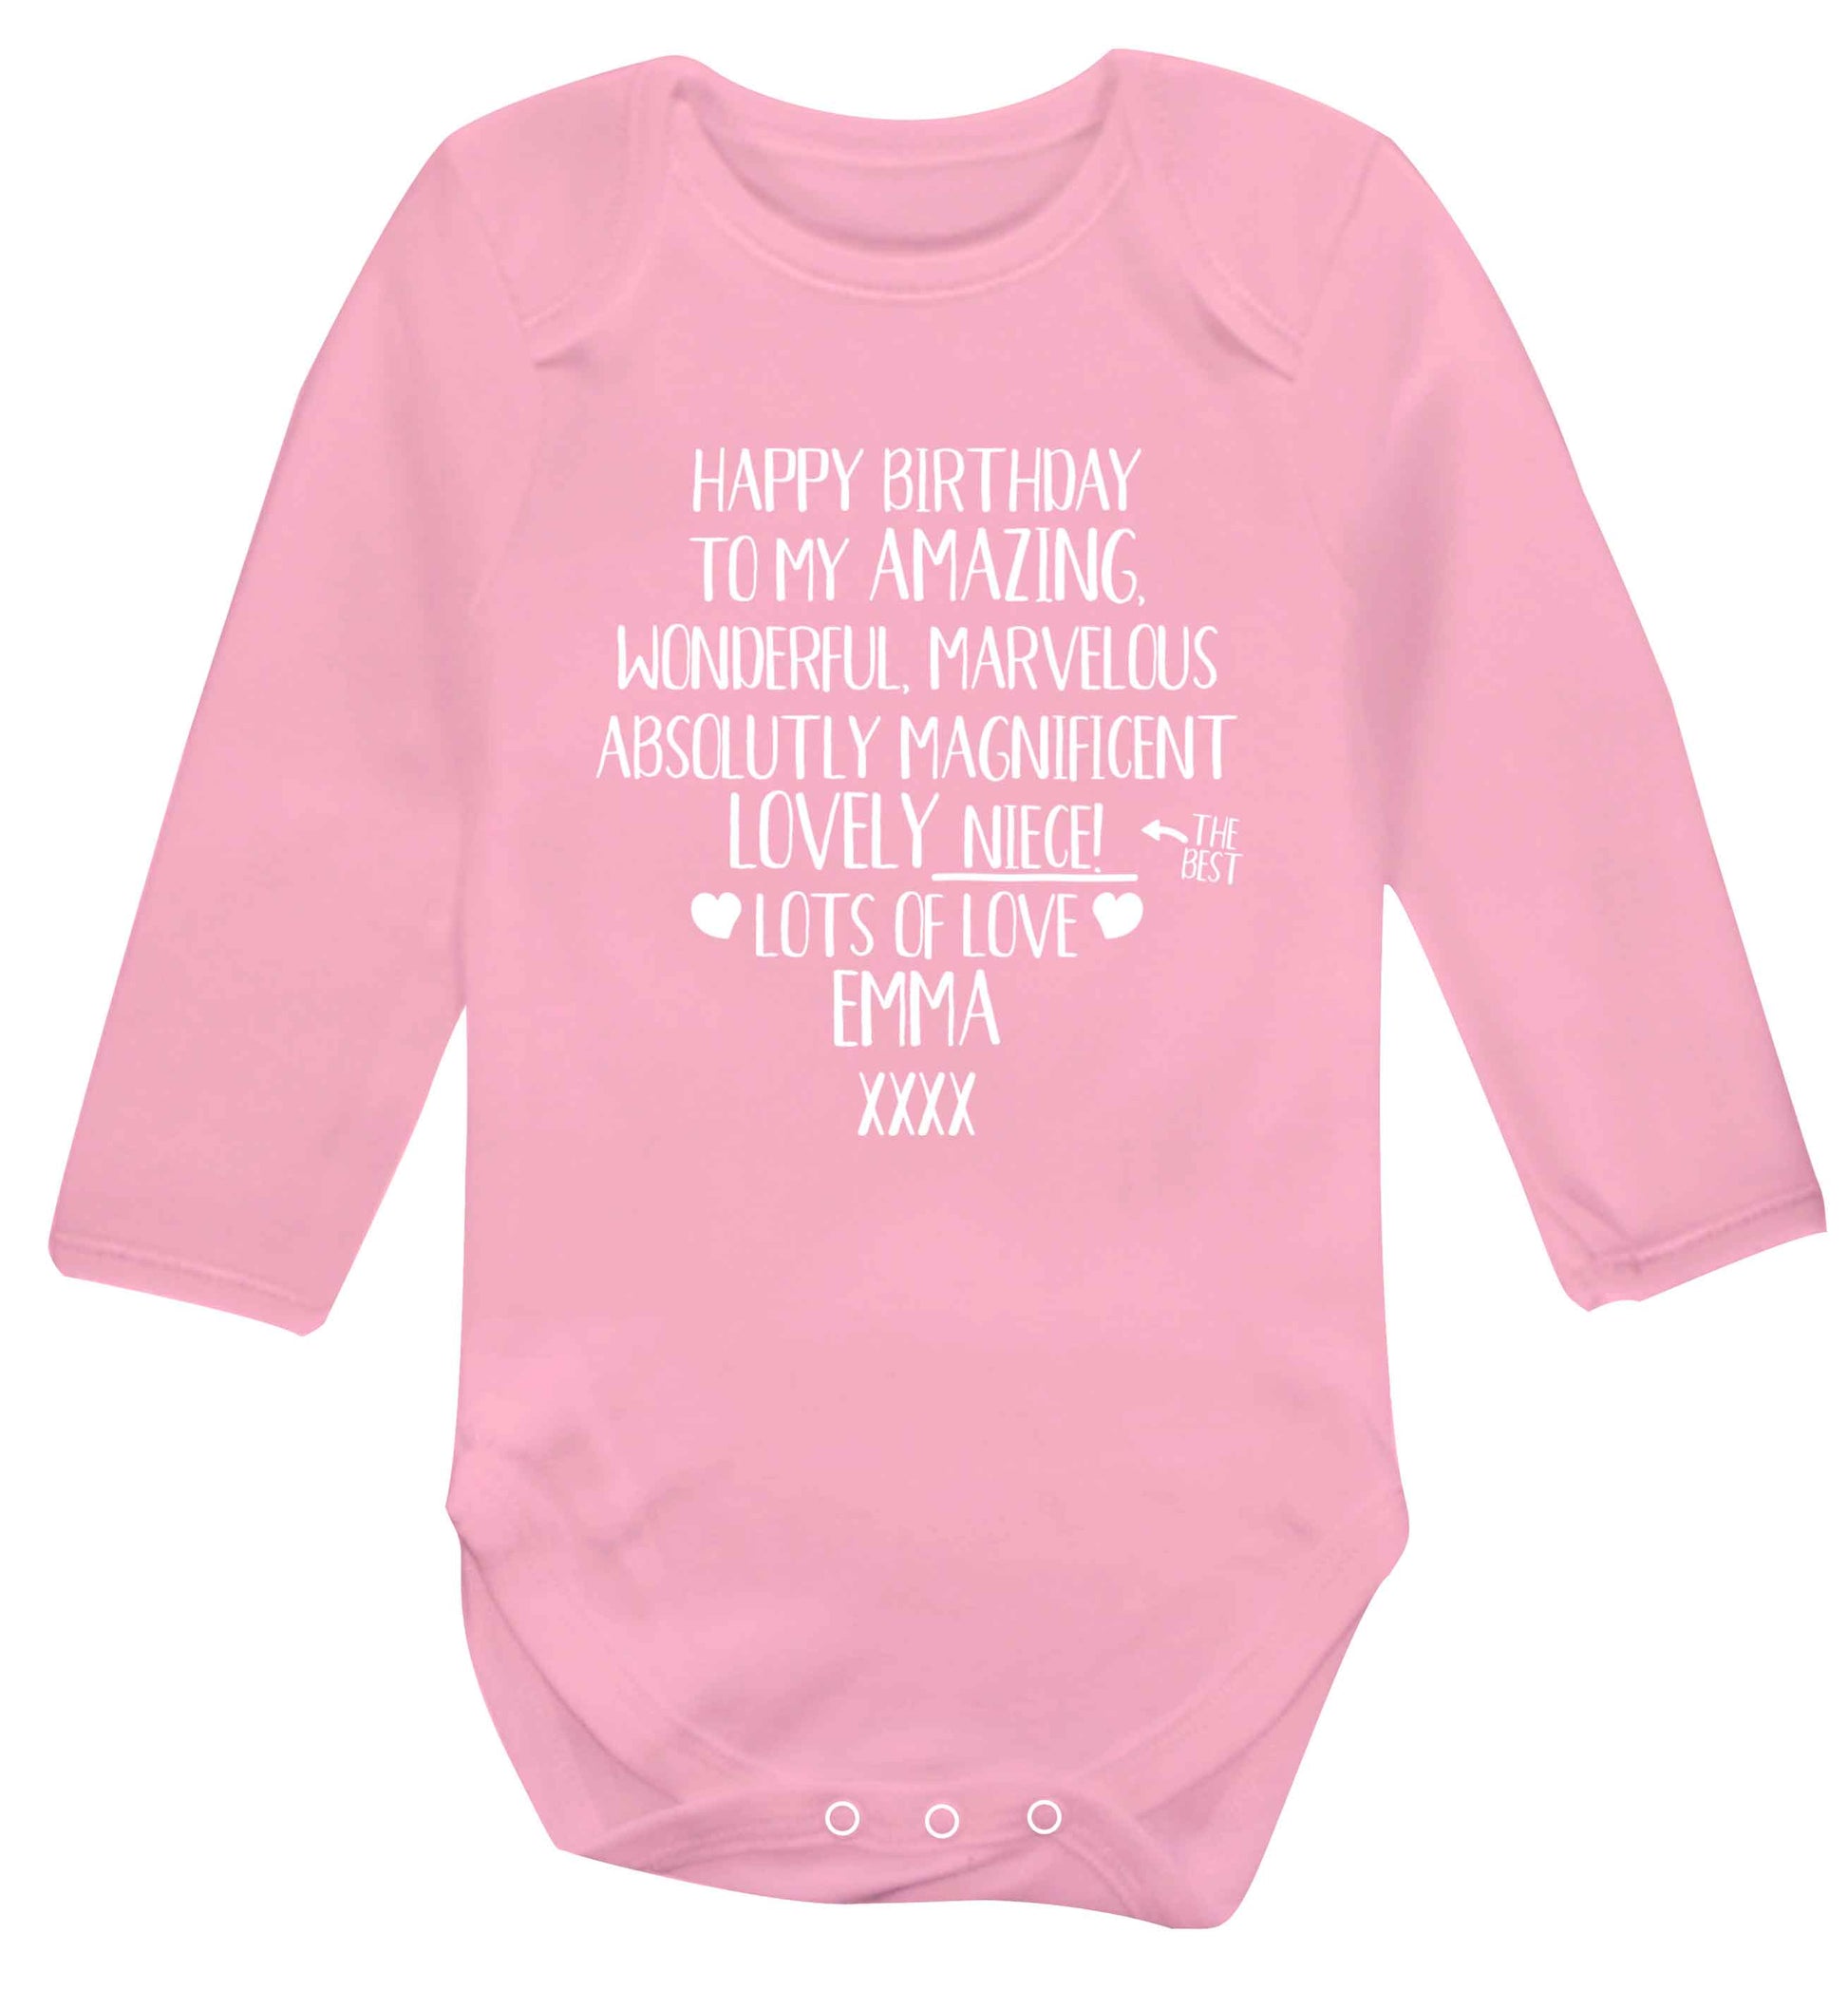 Personalised happy birthday to my amazing, wonderful, lovely niece Baby Vest long sleeved pale pink 6-12 months